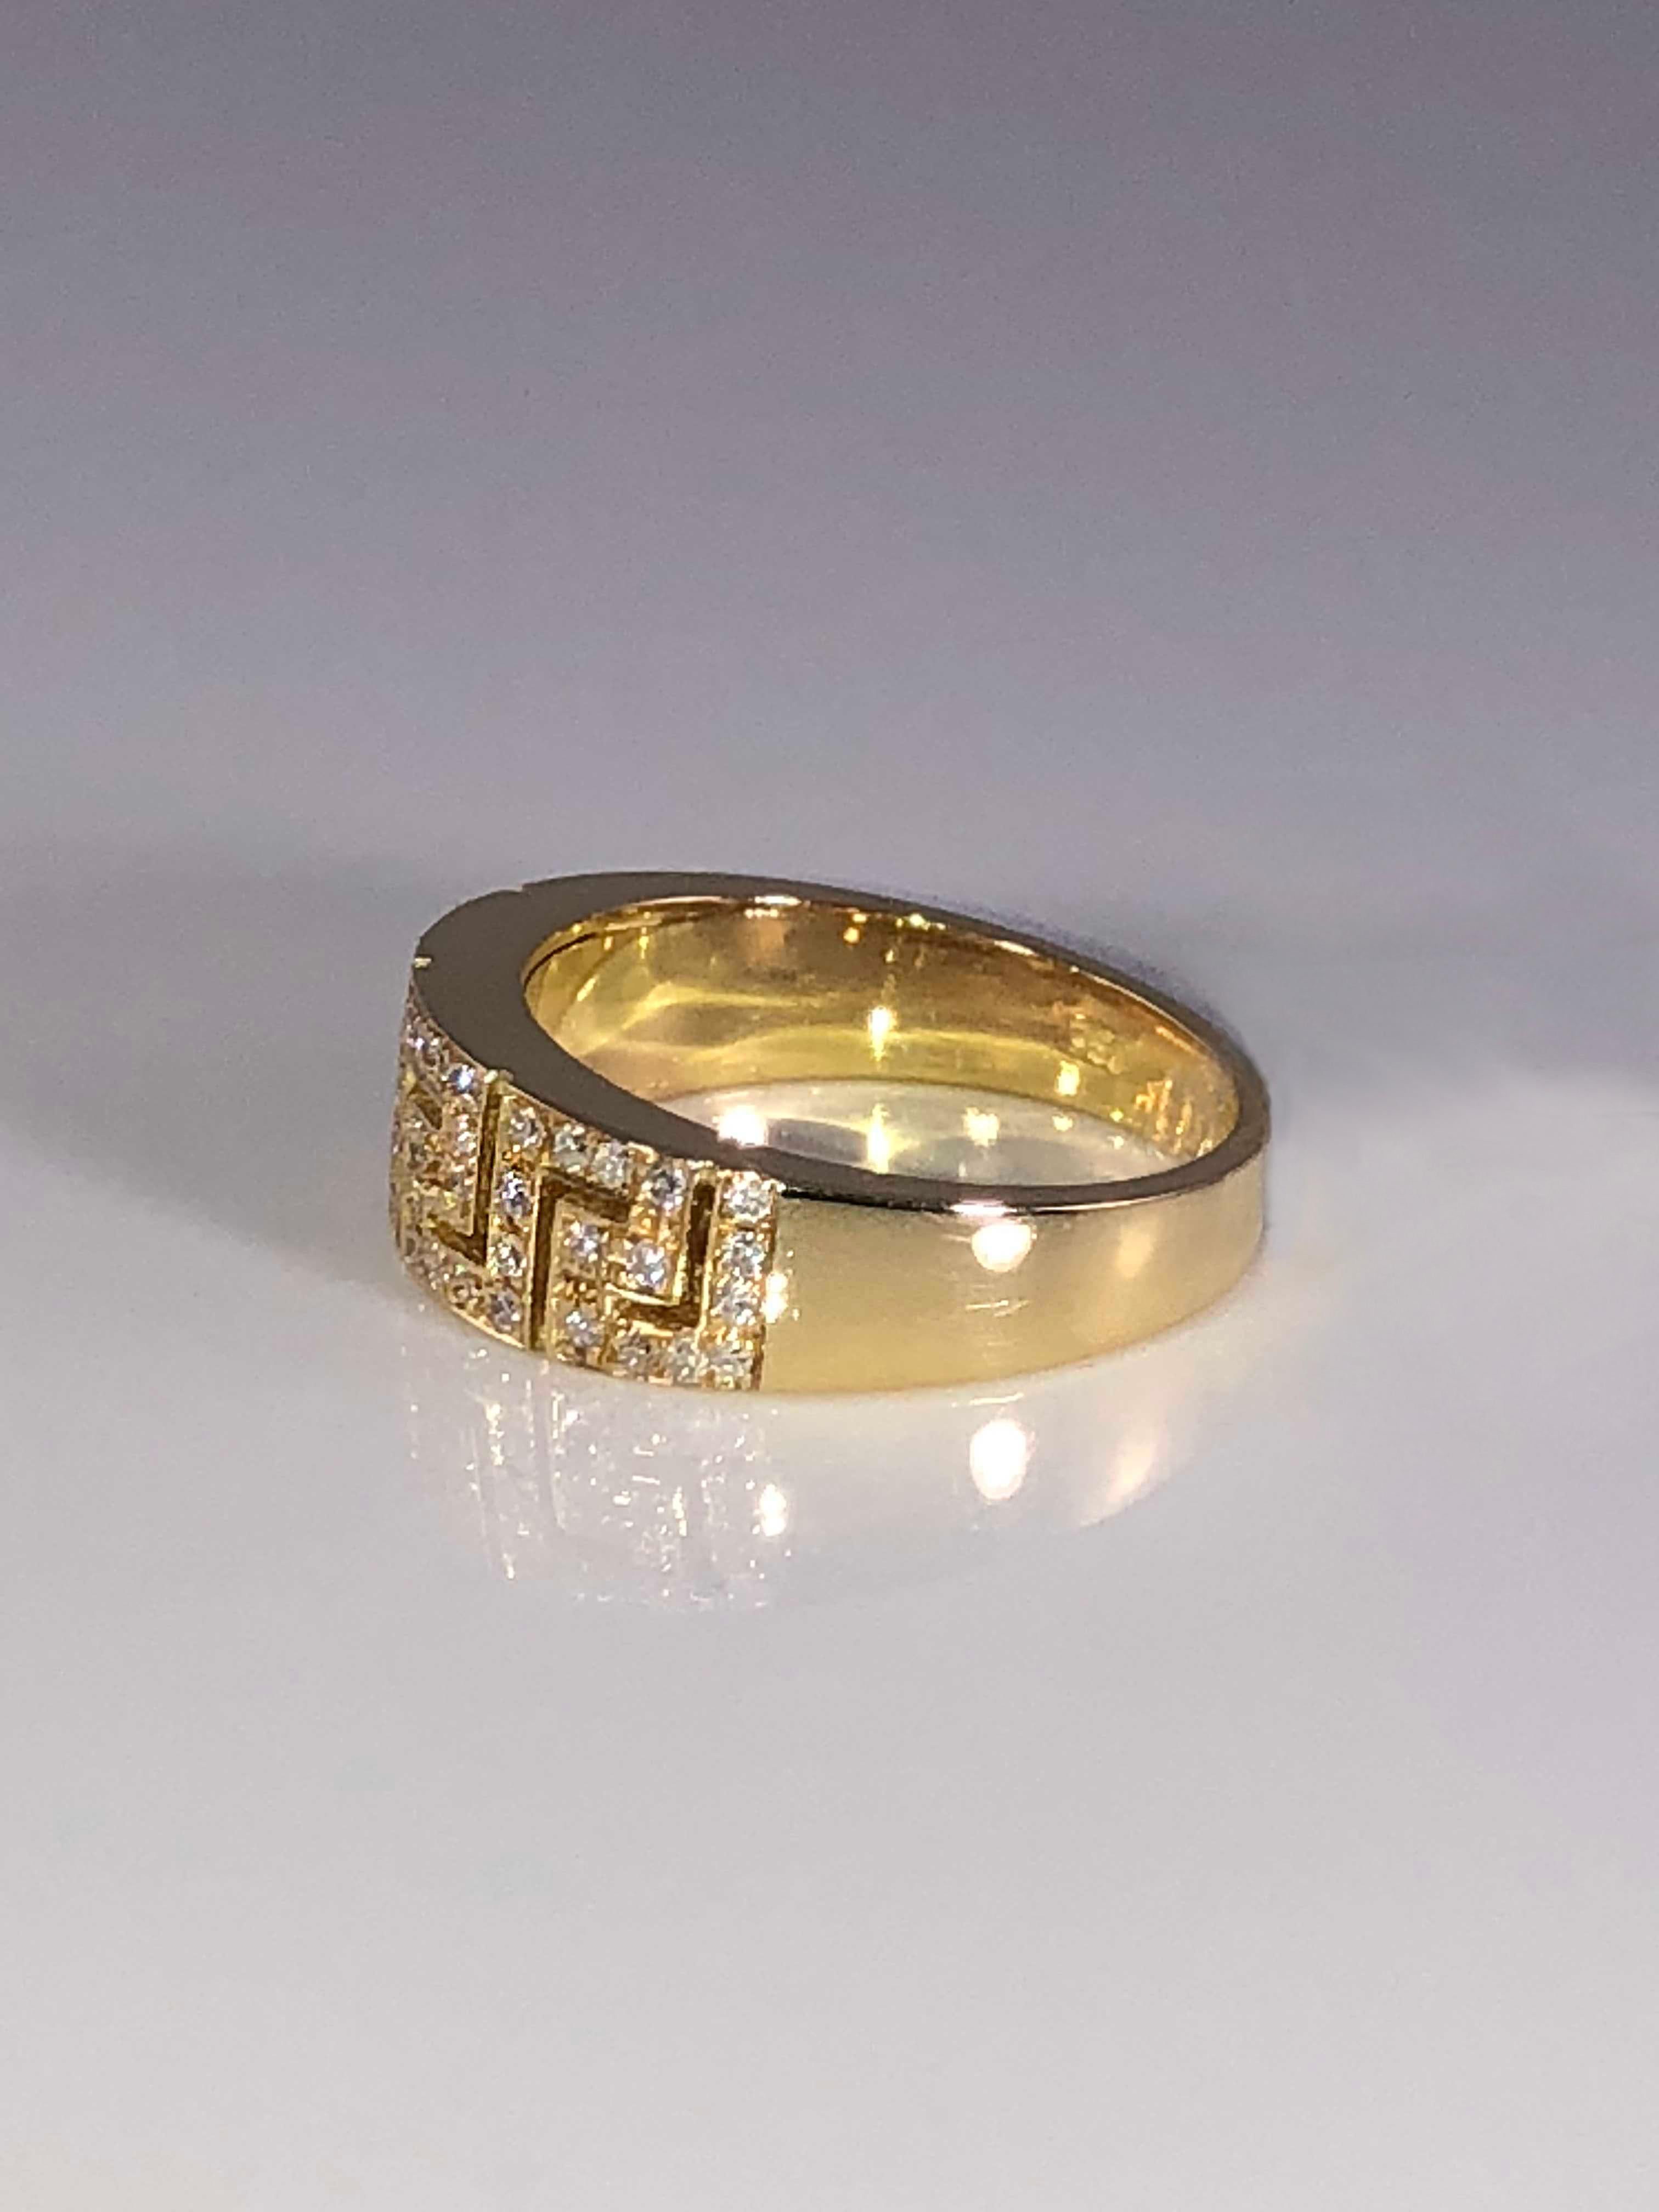 S. Georgios designer 18 Karat Yellow Gold Hand Made Diamond Ring with the Greek Key design that symbolizes eternity all custom-made. It is known as the symbol of long life and is one of the most classic designs in the world.
The beautiful ring is